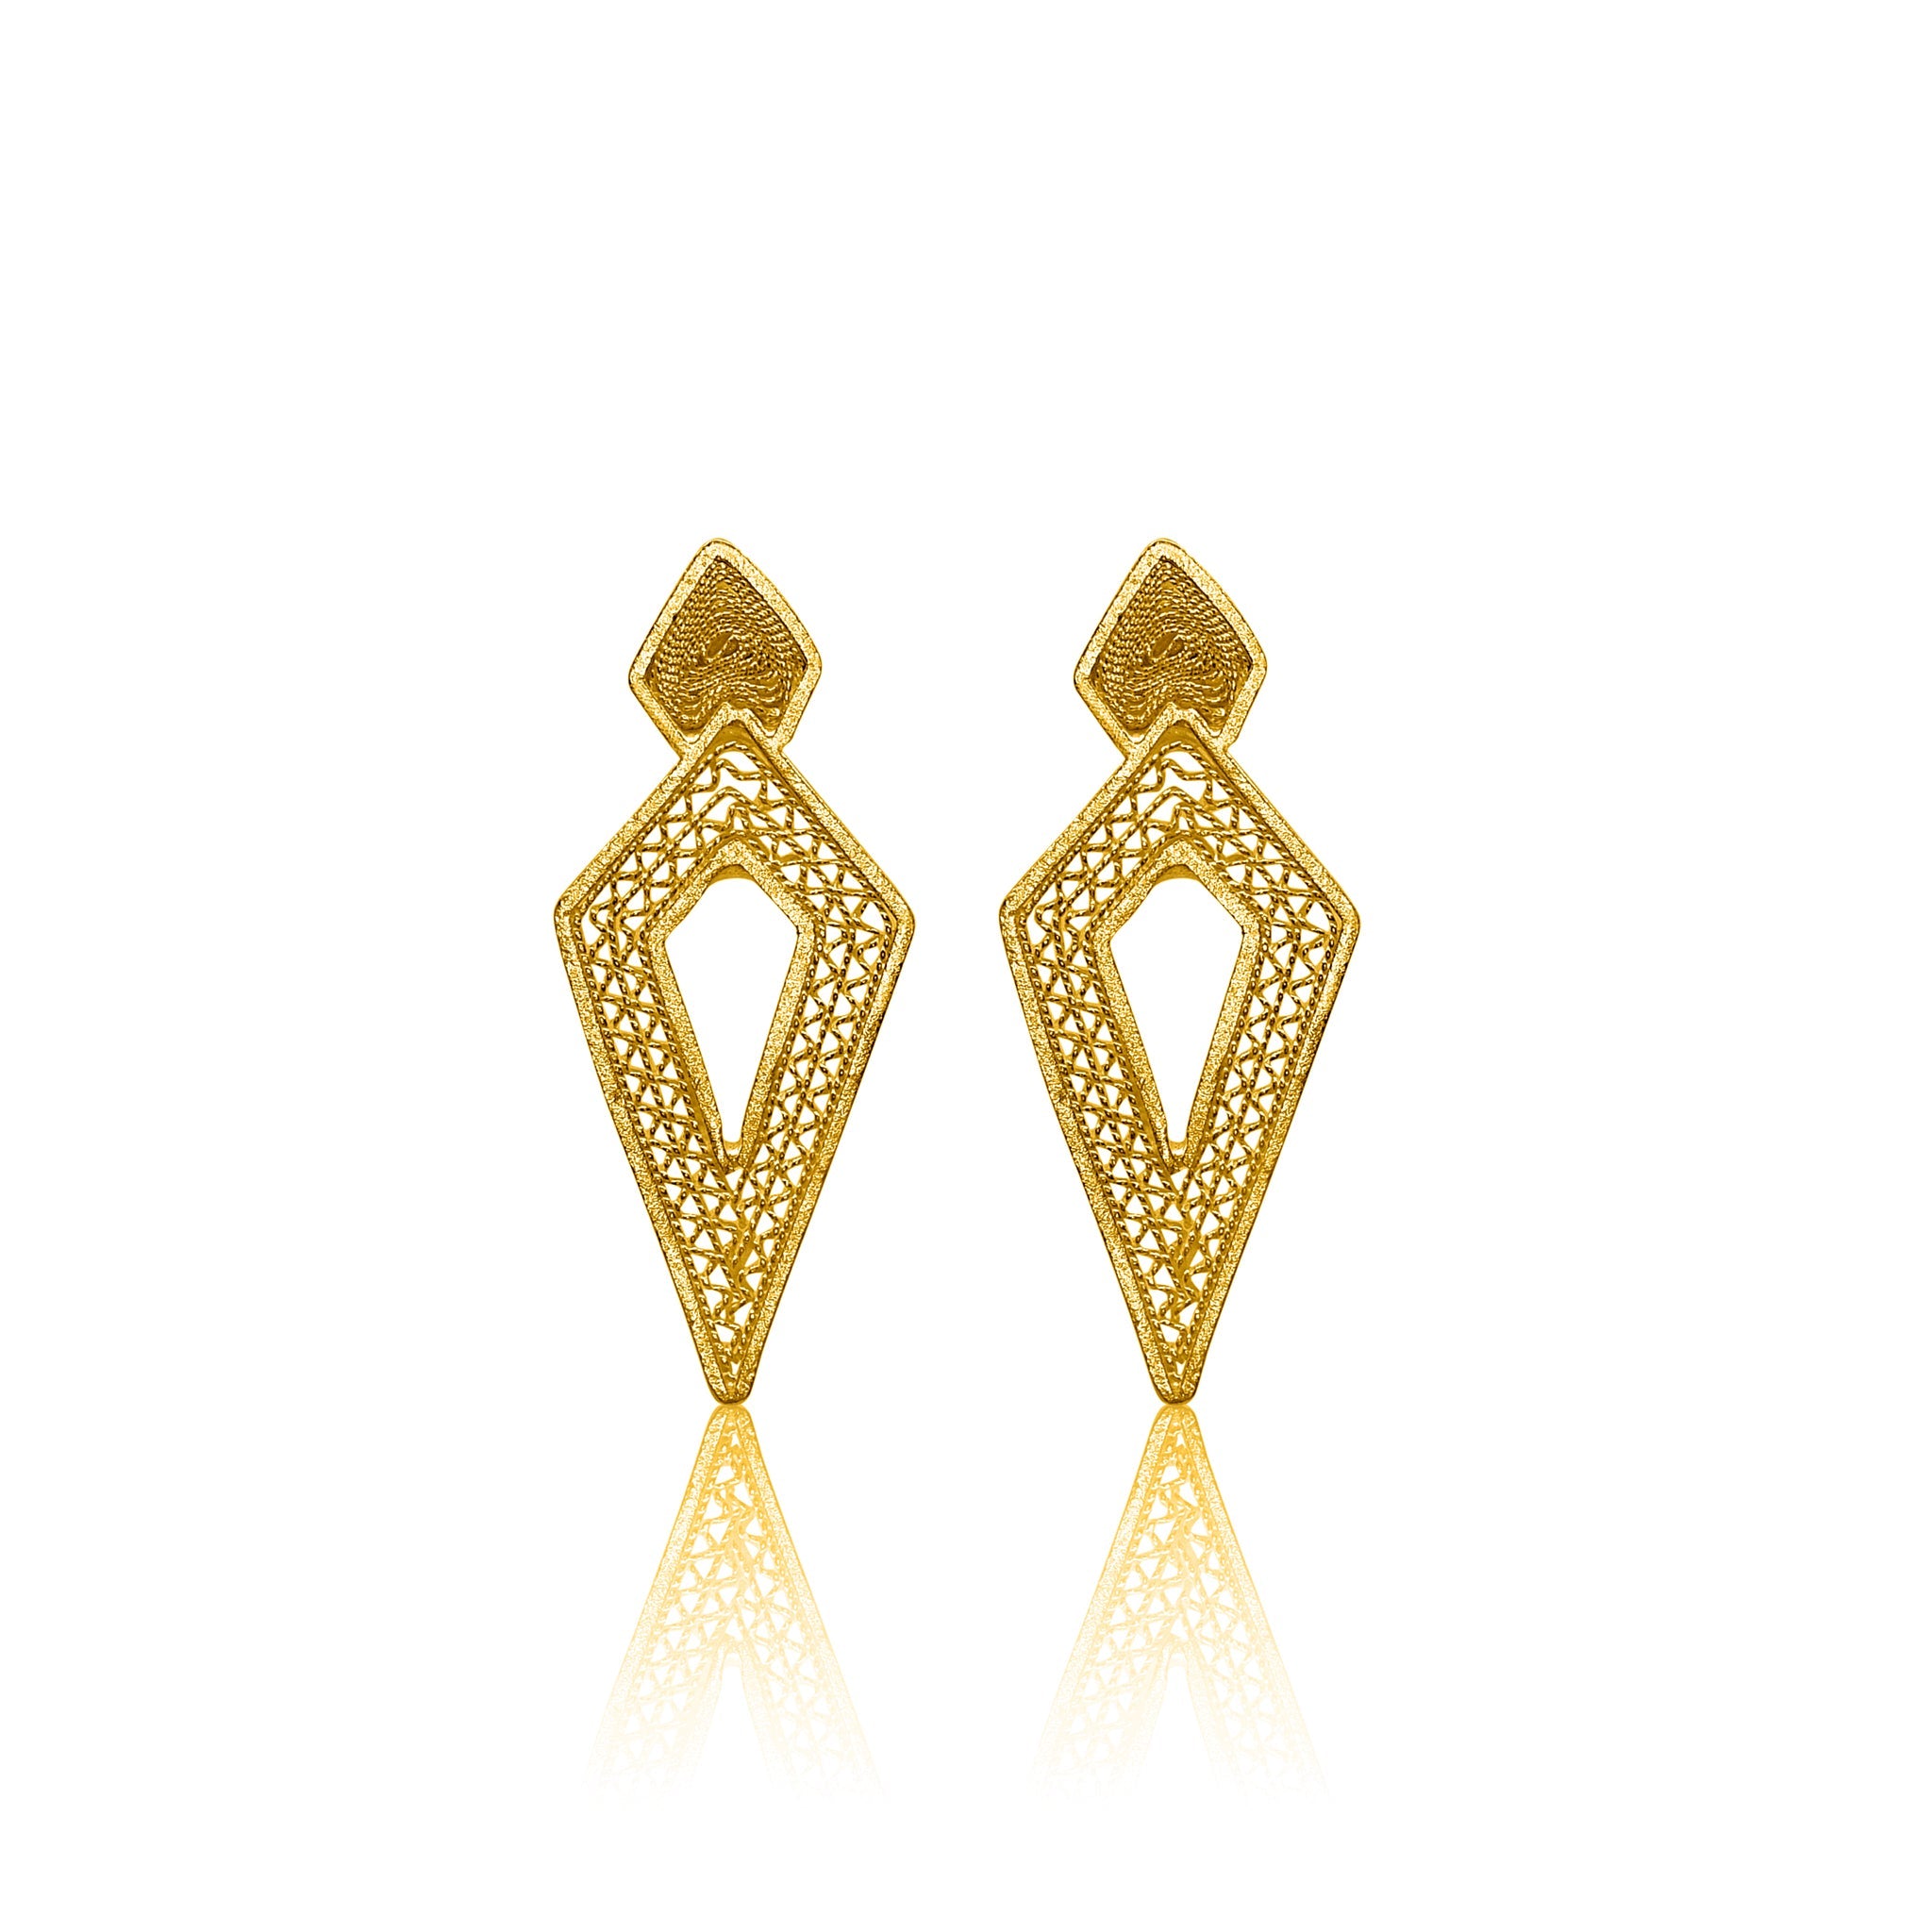 Buy quality 18k Gold Small Size Design Earrings in Ahmedabad